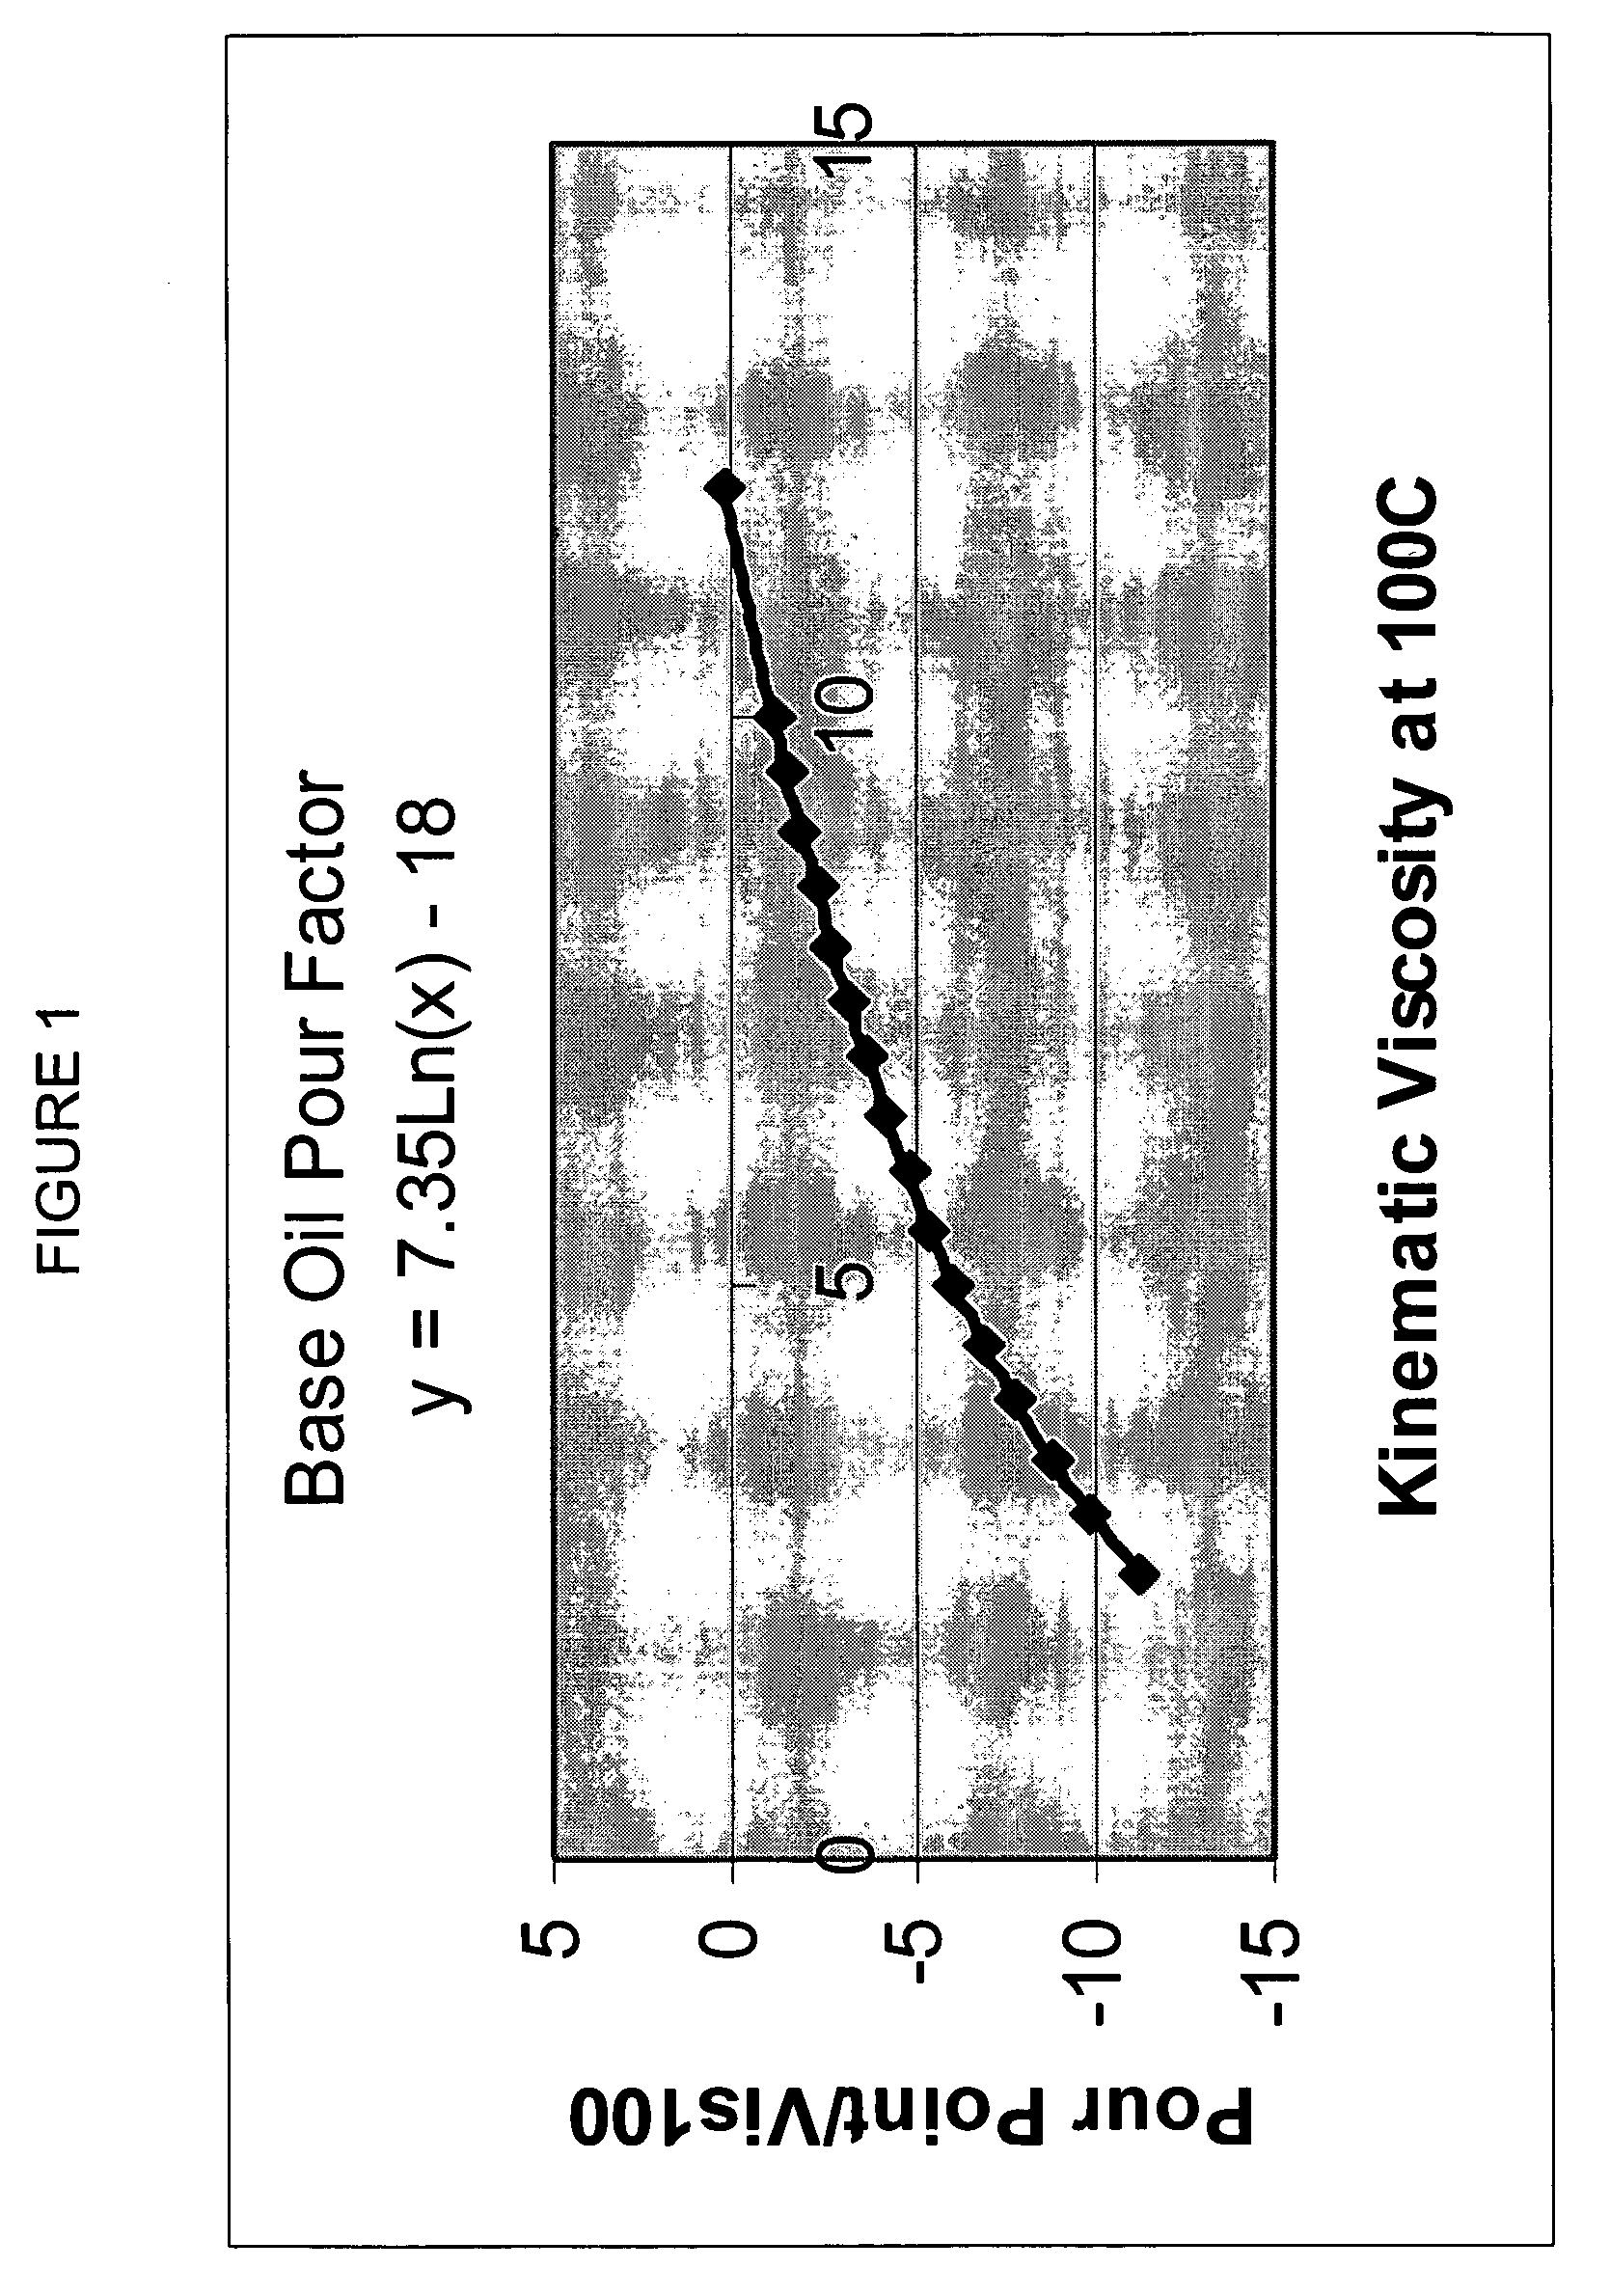 Process for manufacturing lubricating base oil with high monocycloparaffins and low multicycloparaffins